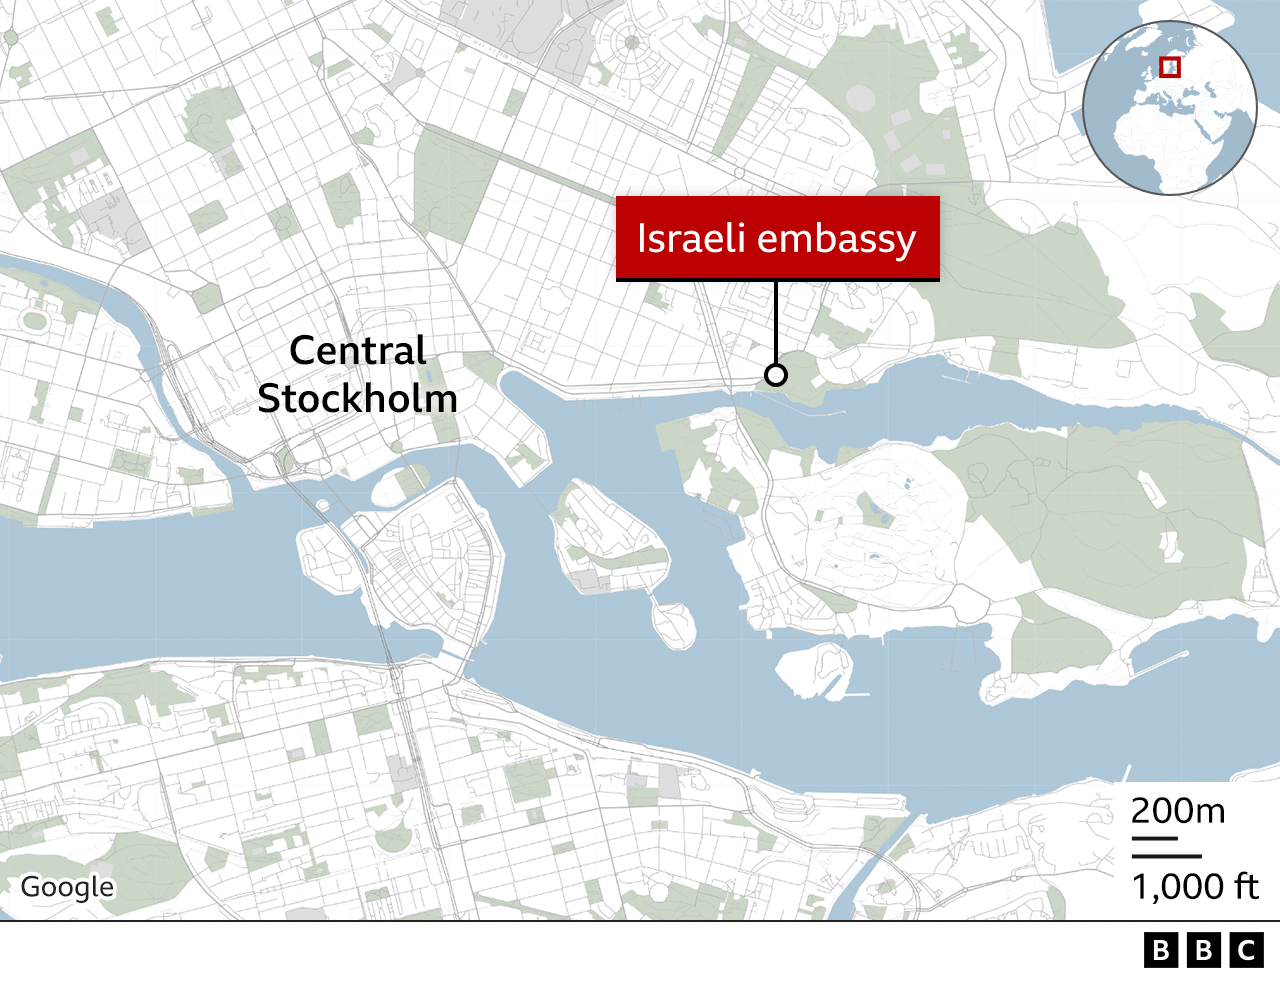 A BBC map shows the location of the Israeli embassy, to the immediate east of Stockholm city centre